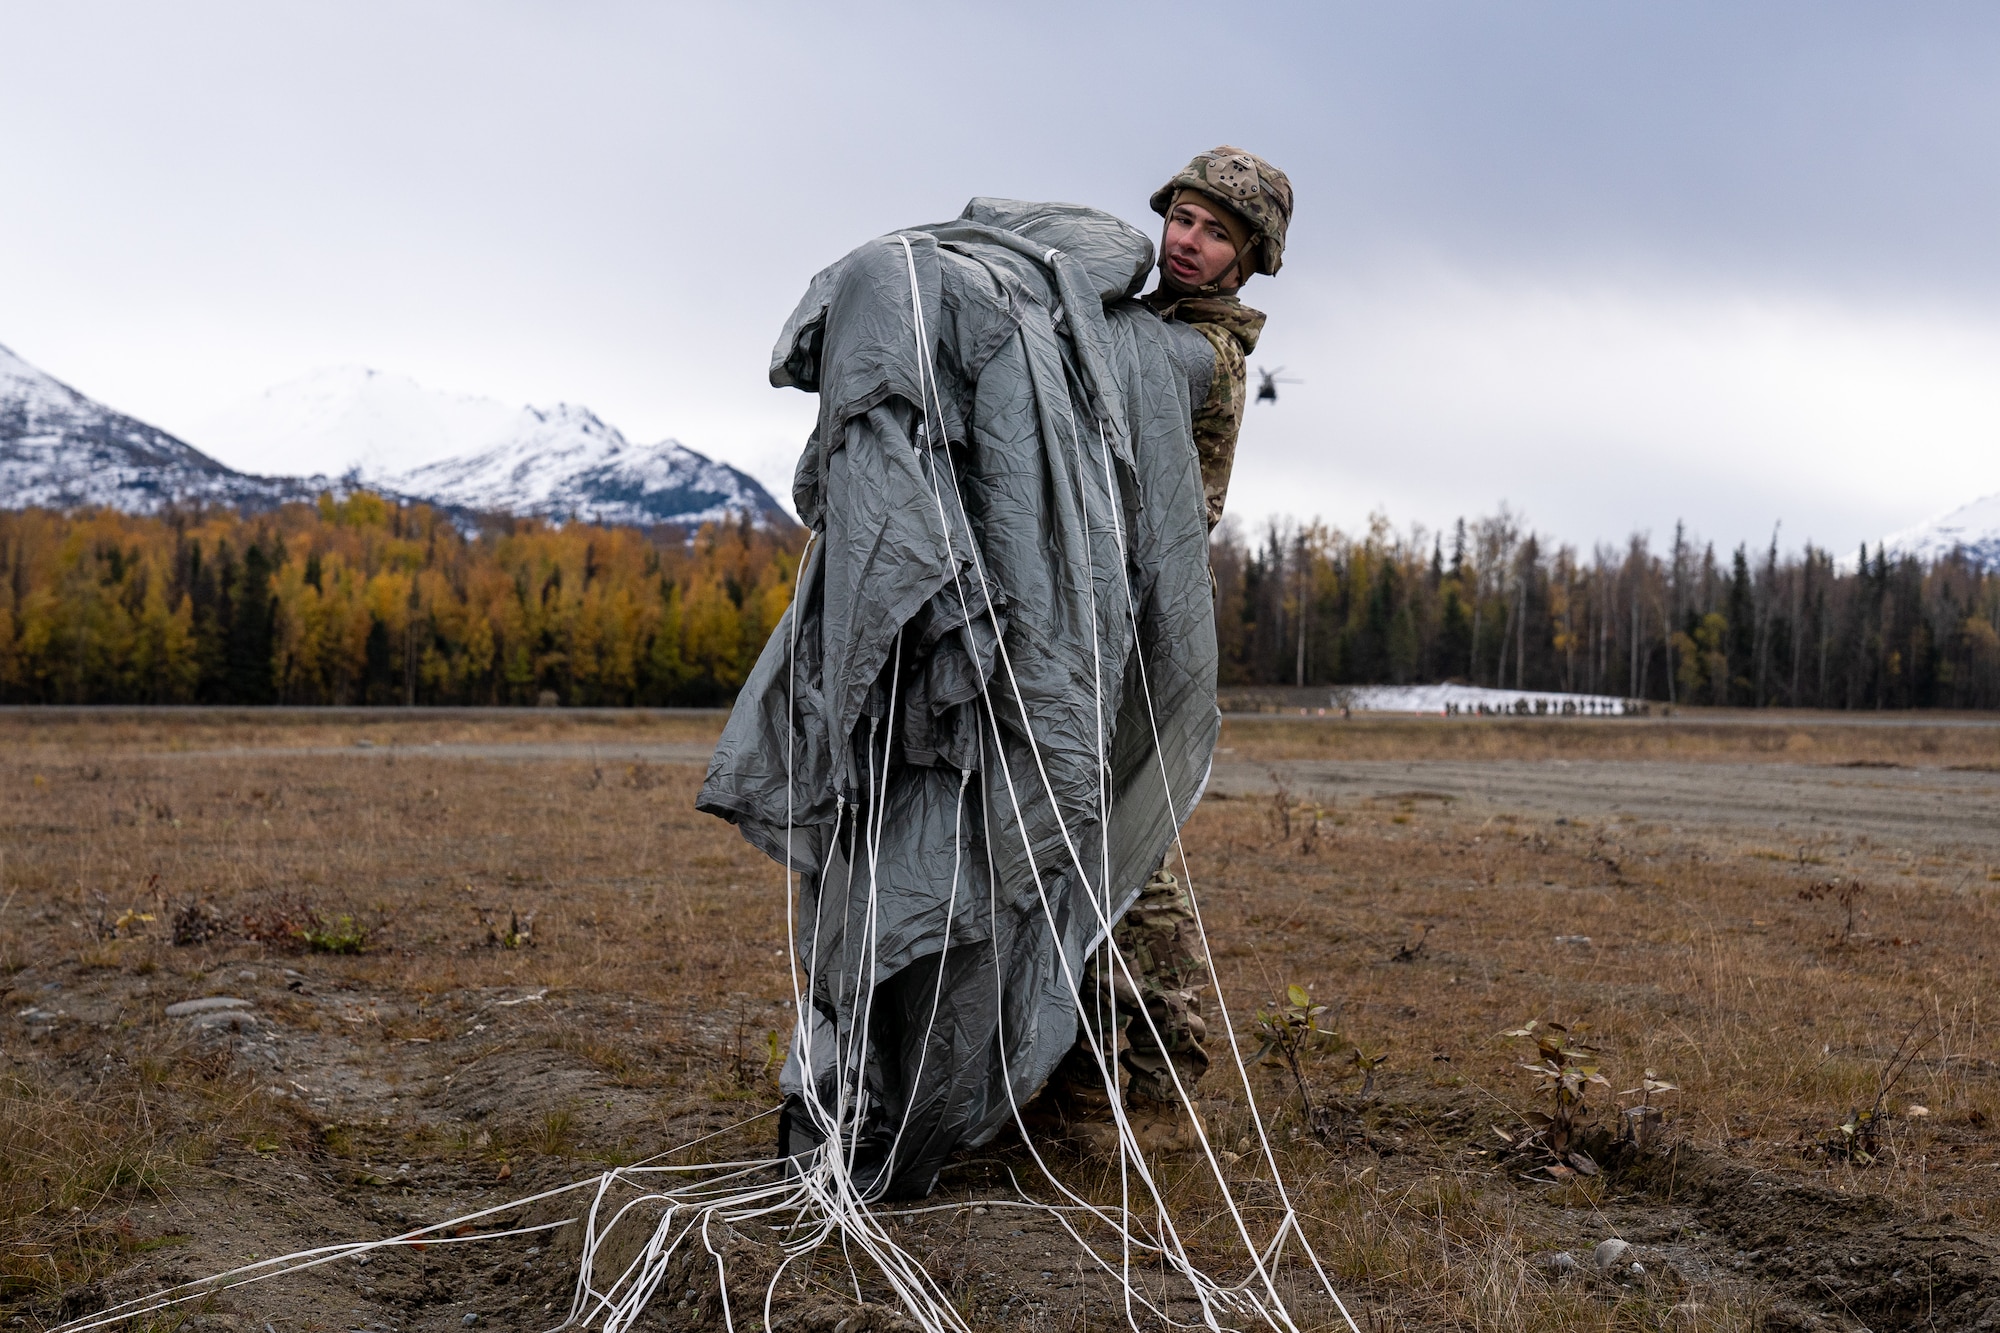 U.S. Army Spc. Chris Pulsipher, a paratrooper assigned to the 1st Squadron (Airborne), 40th Cavalry Regiment, 4th Infantry Brigade Combat Team (Airborne), 25th Infantry Division, U.S. Army Alaska, recovers his parachute after jumping from a CH-47 Chinook.